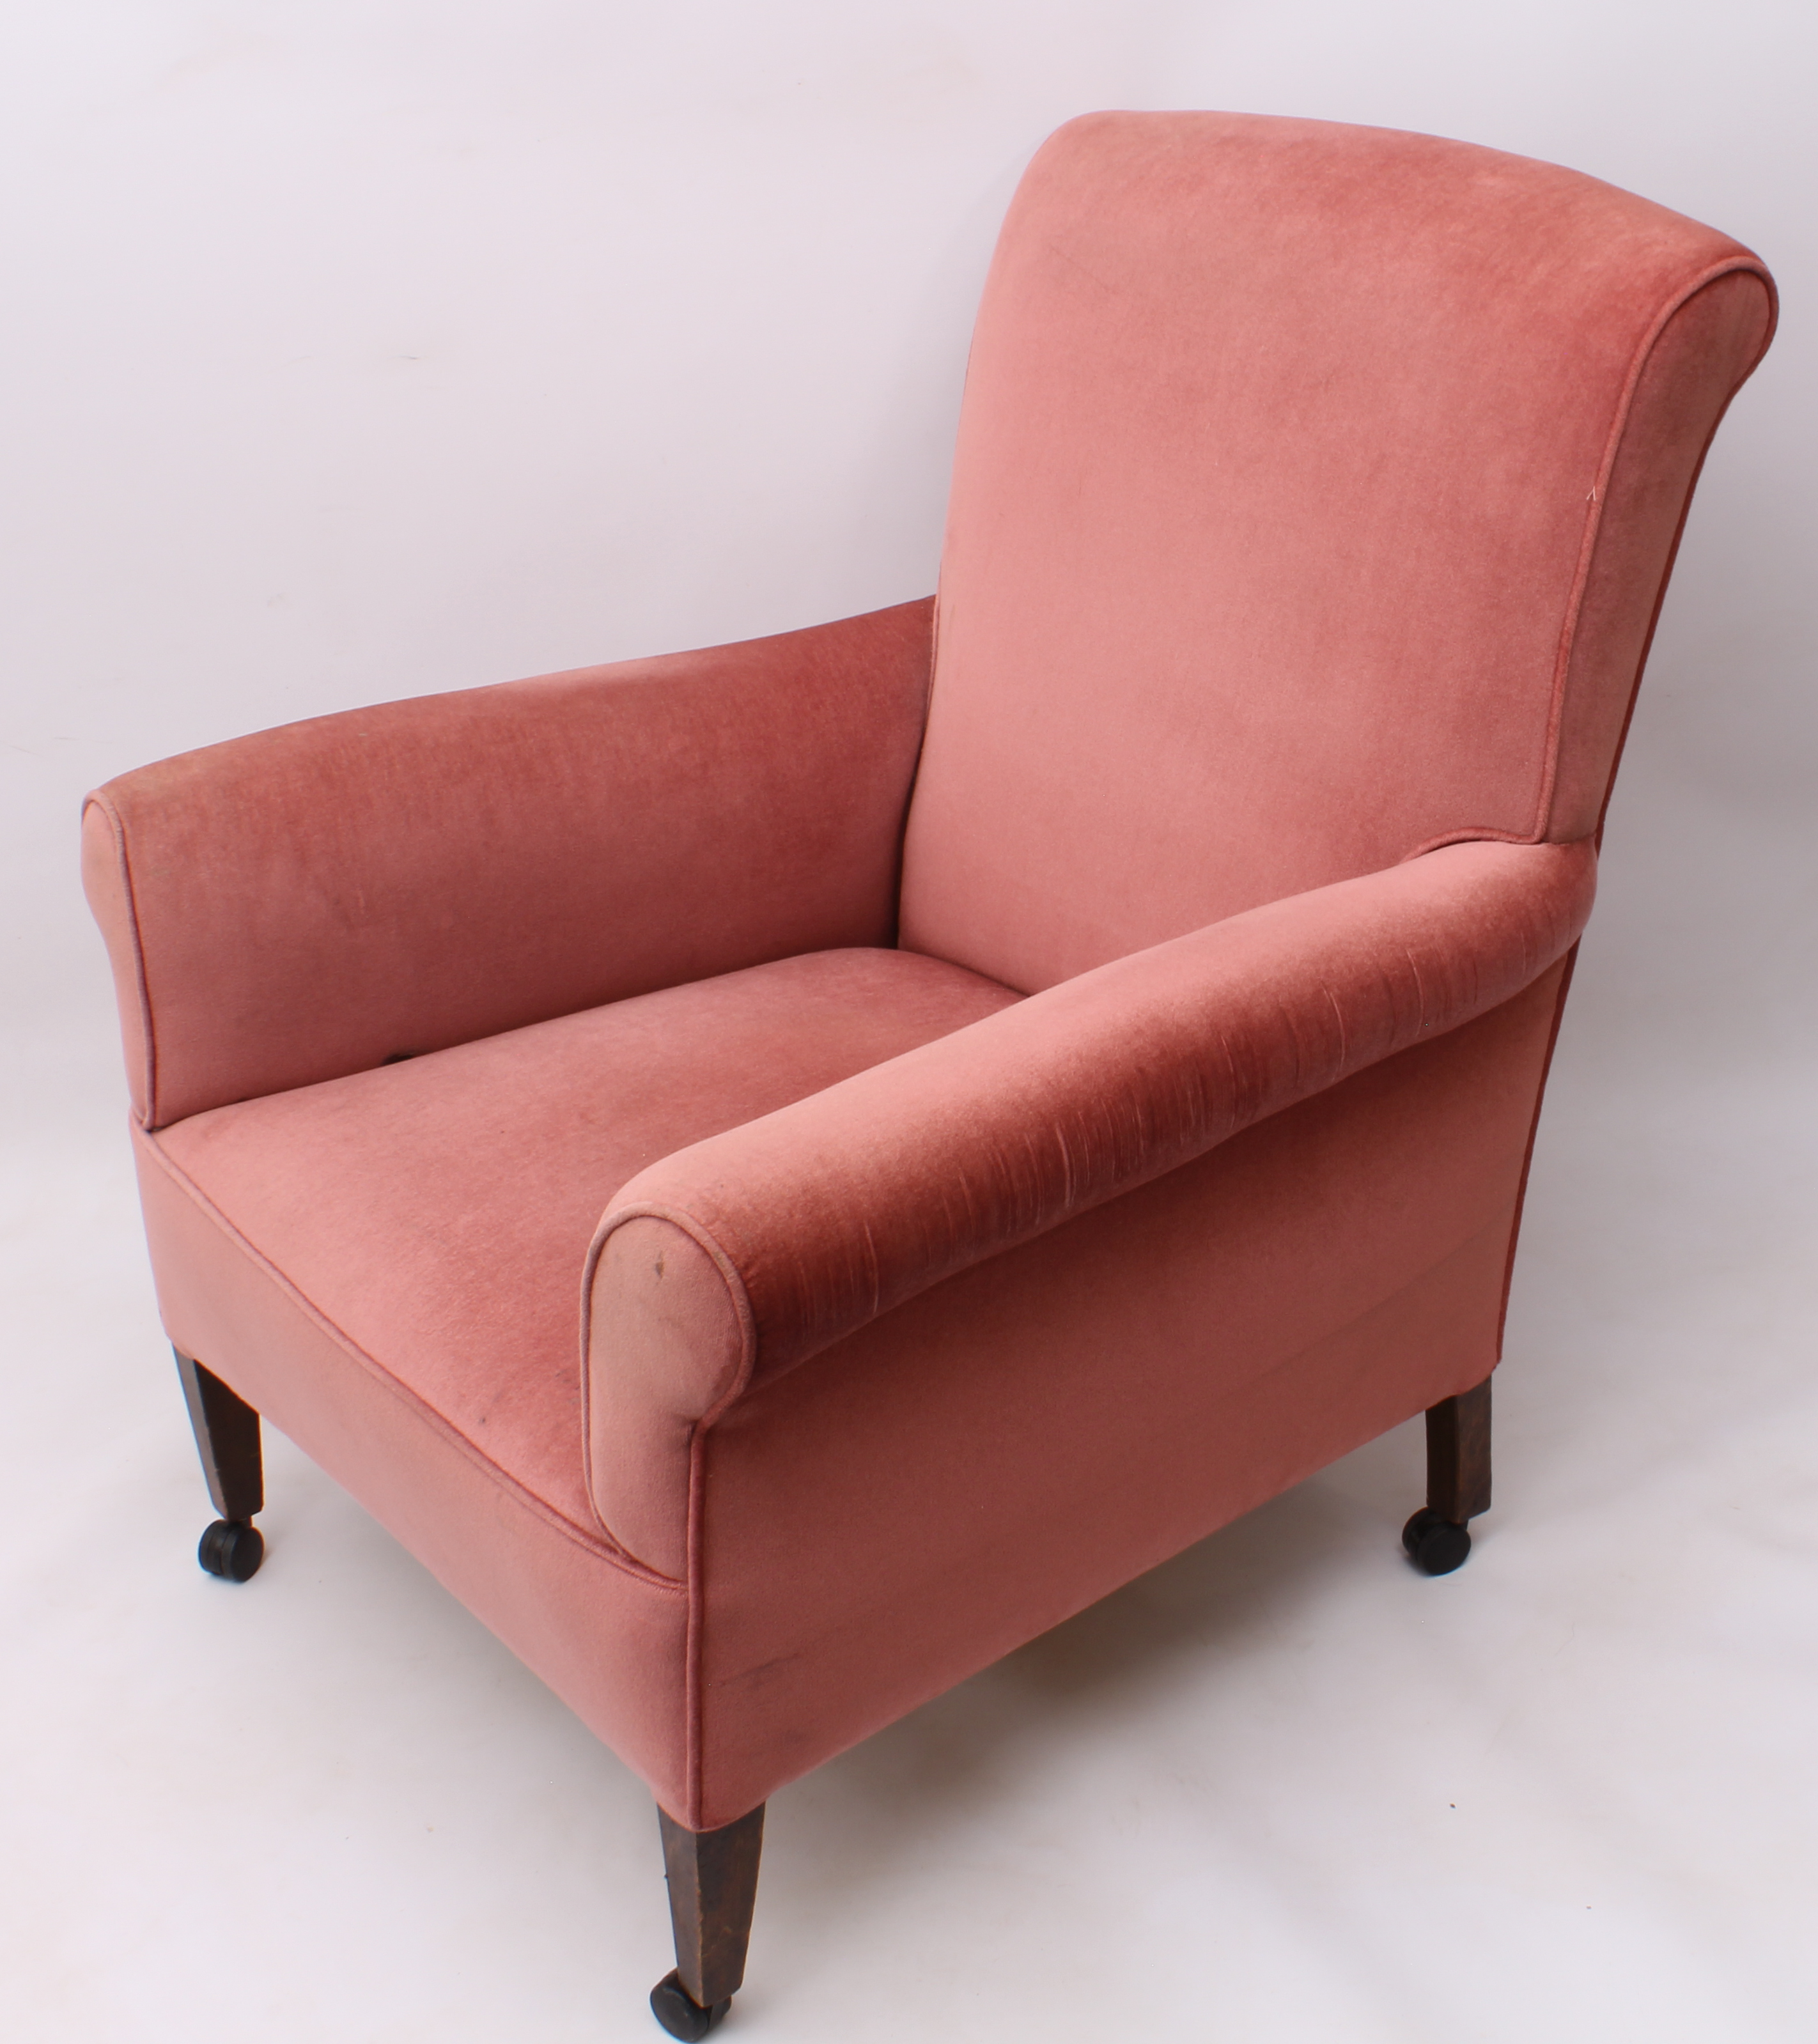 An early 20th century armchair - upholstered in pink velour, with square tapered beechwood legs